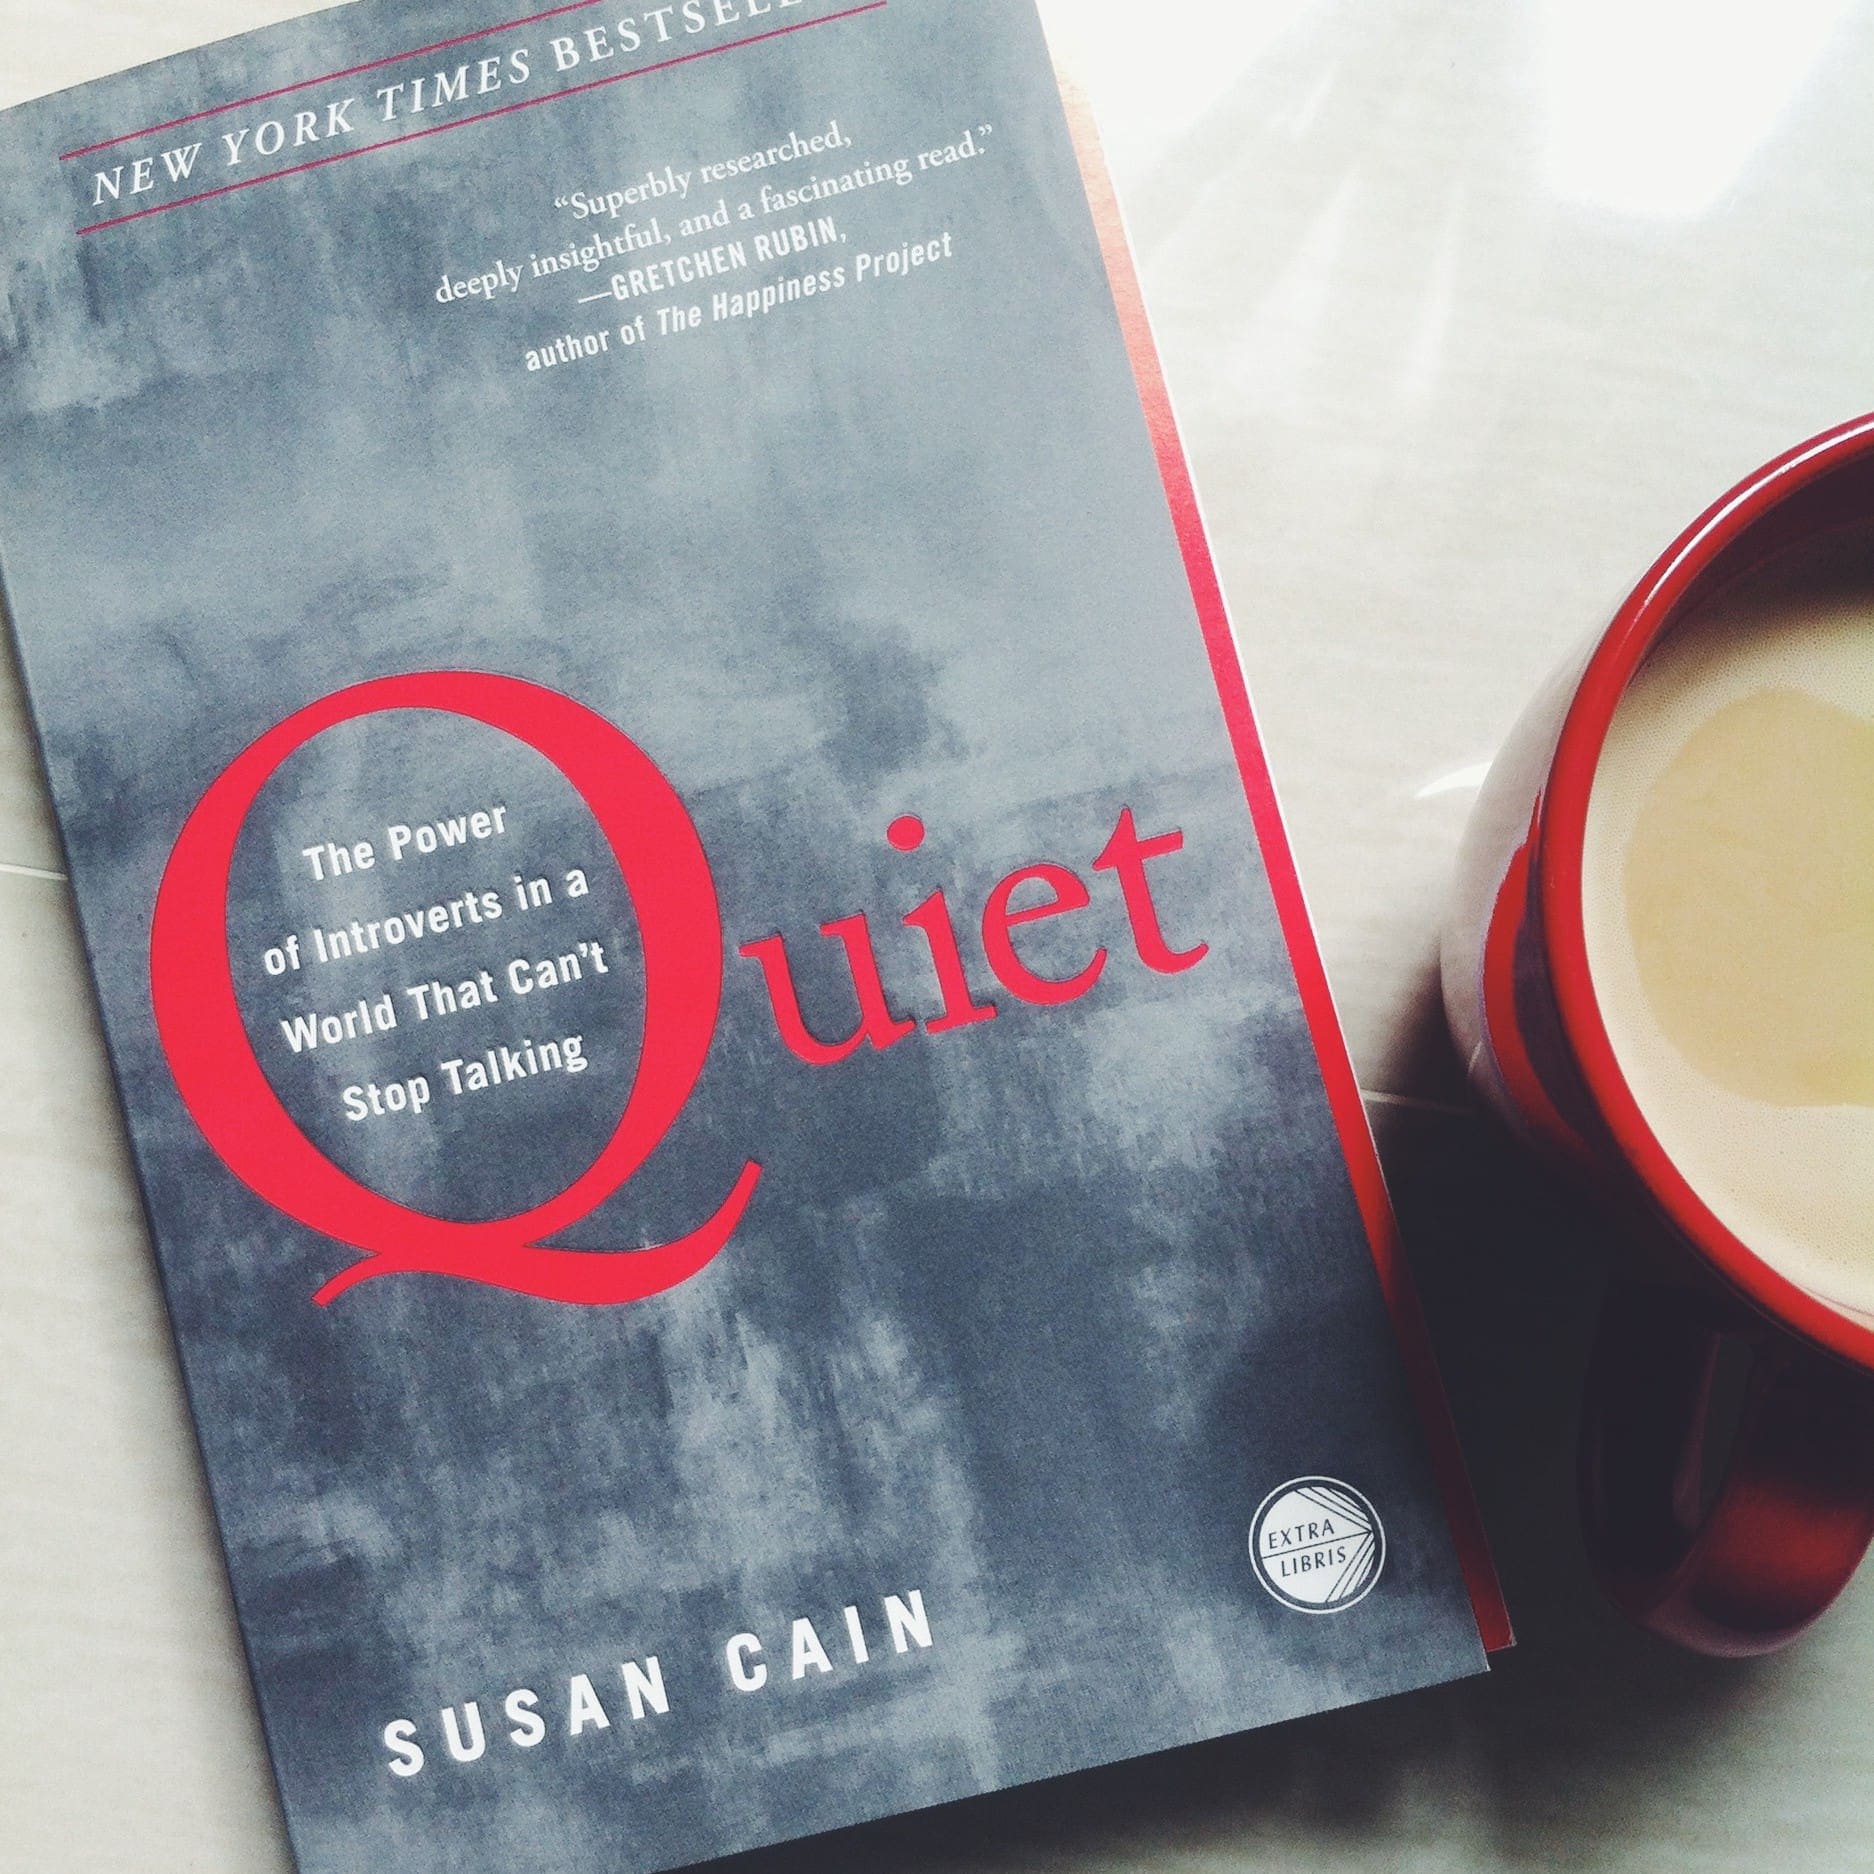 quiet-the-power-of-introverts-in-a-world-that-cant-stop-talking-by-susan-cain_t20_wKyPbW